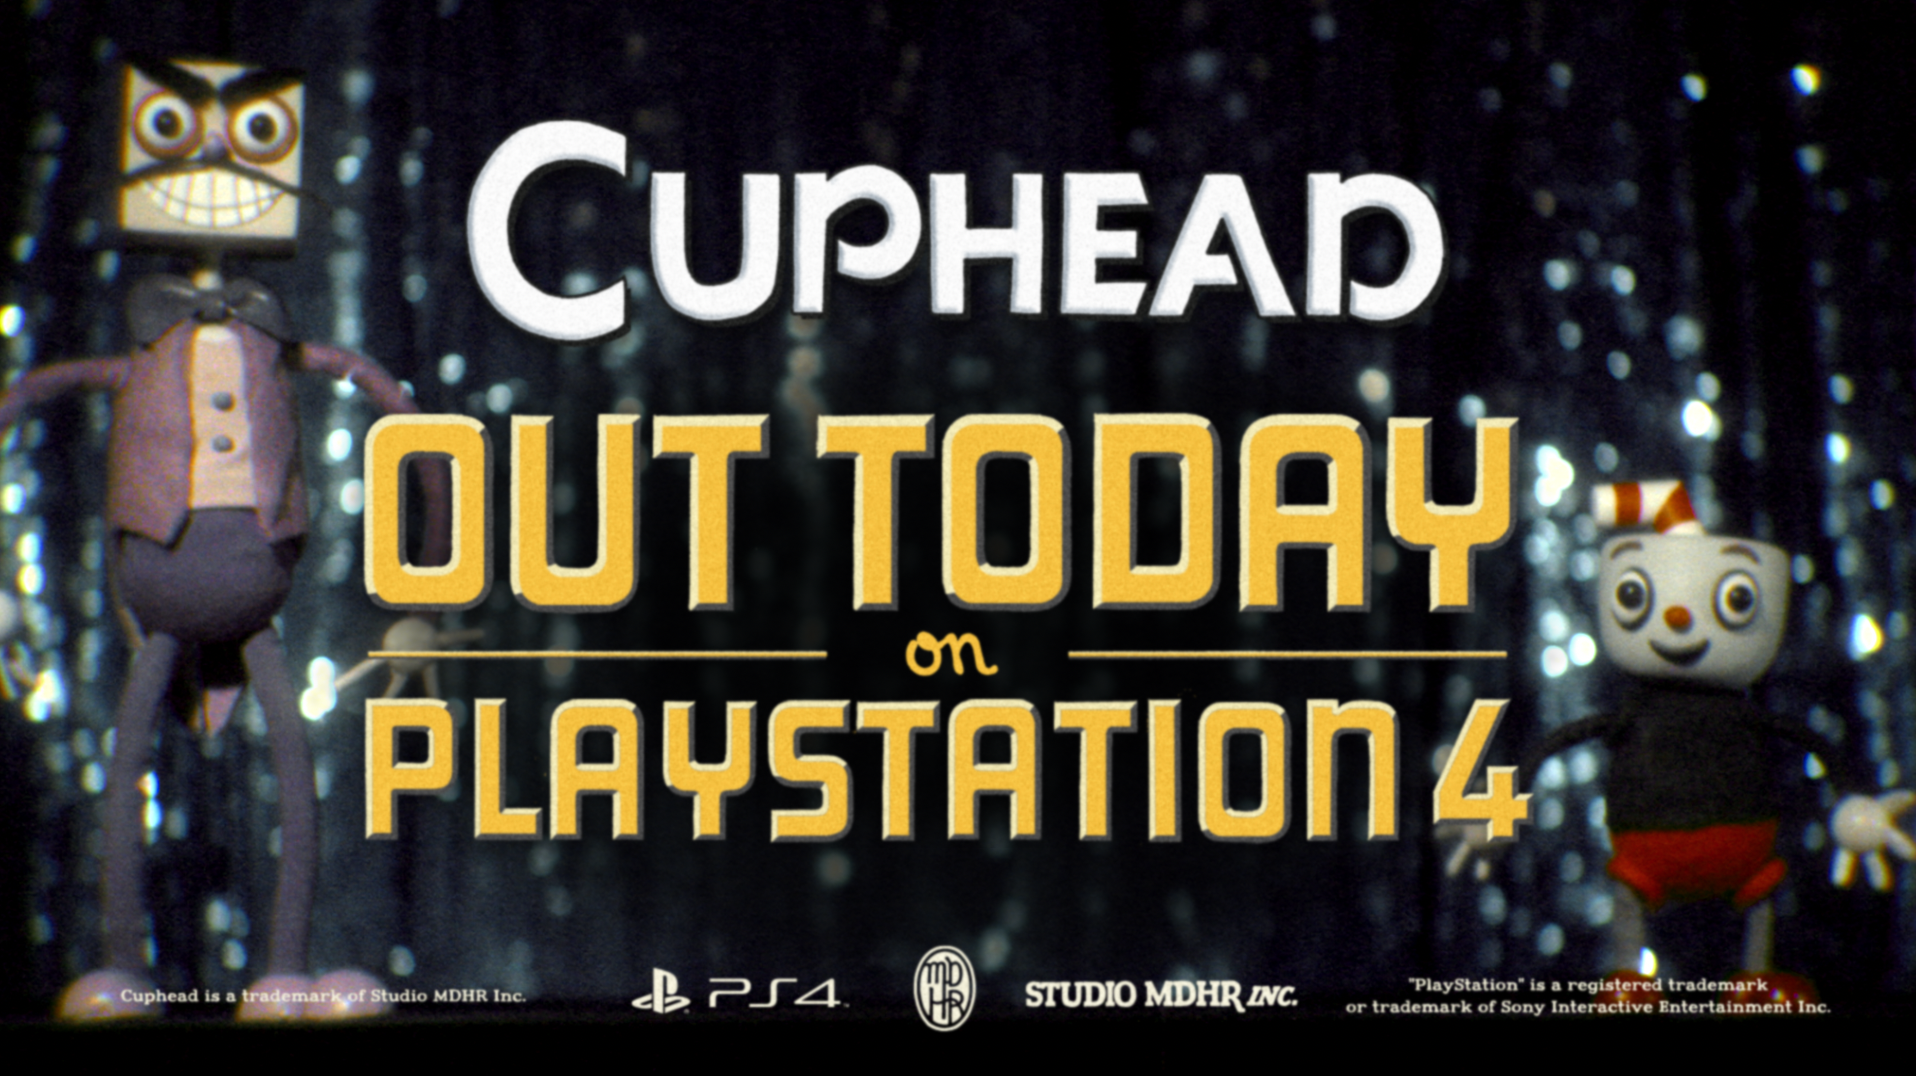 Studio MDHR on Twitter: "Surprise!! Cuphead coming to PlayStation 4 ... That's right: you'll be able purchase the game starting today on the PlayStation Store. While you're here, please enjoy